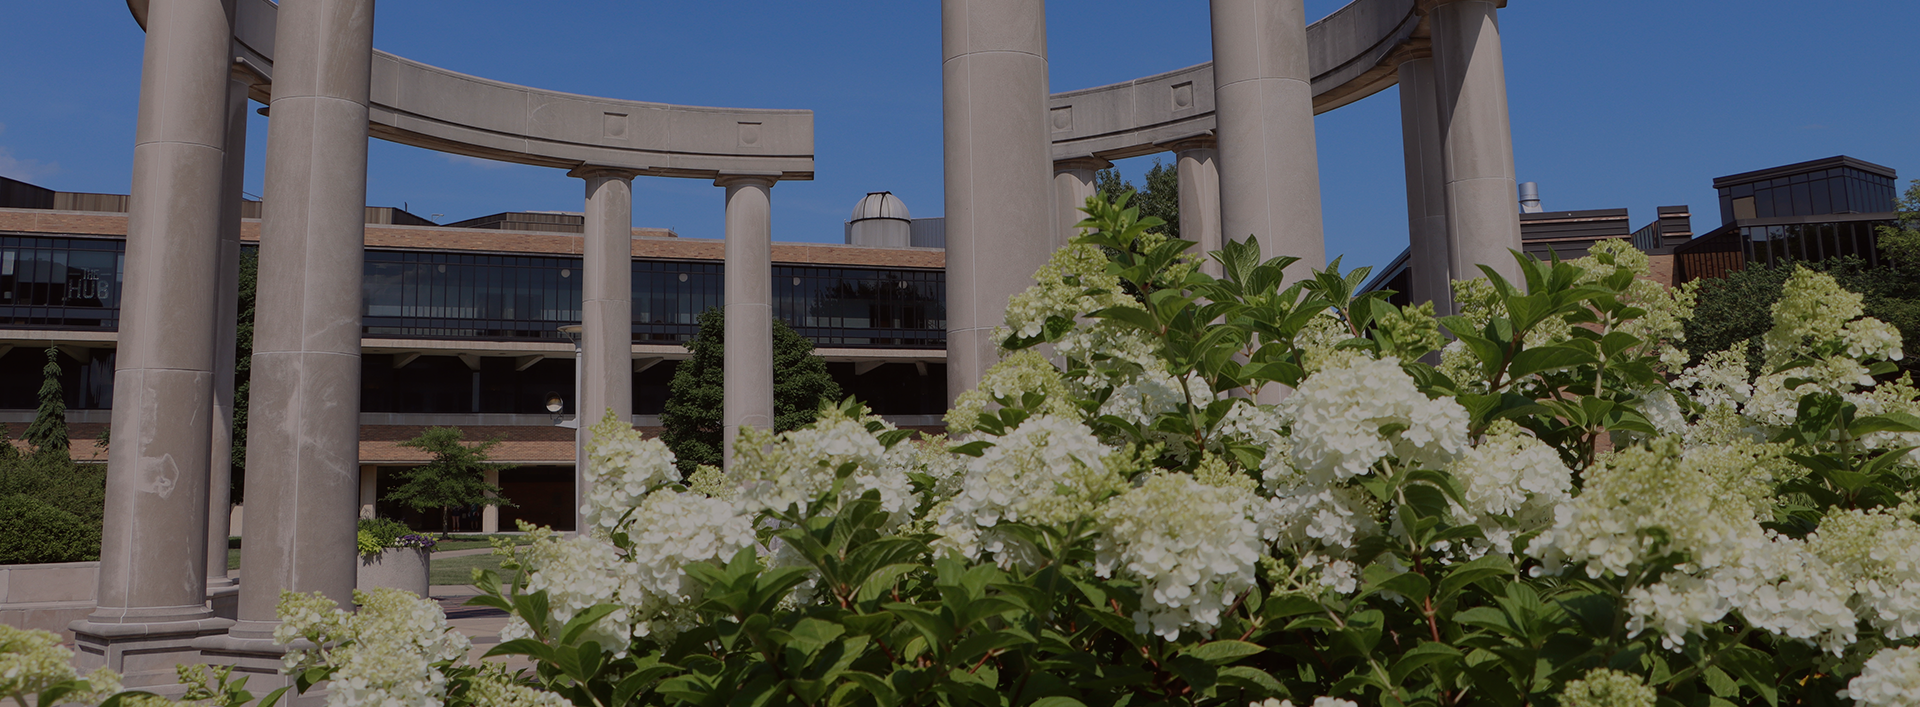 colonnade with hydrangea in foreground